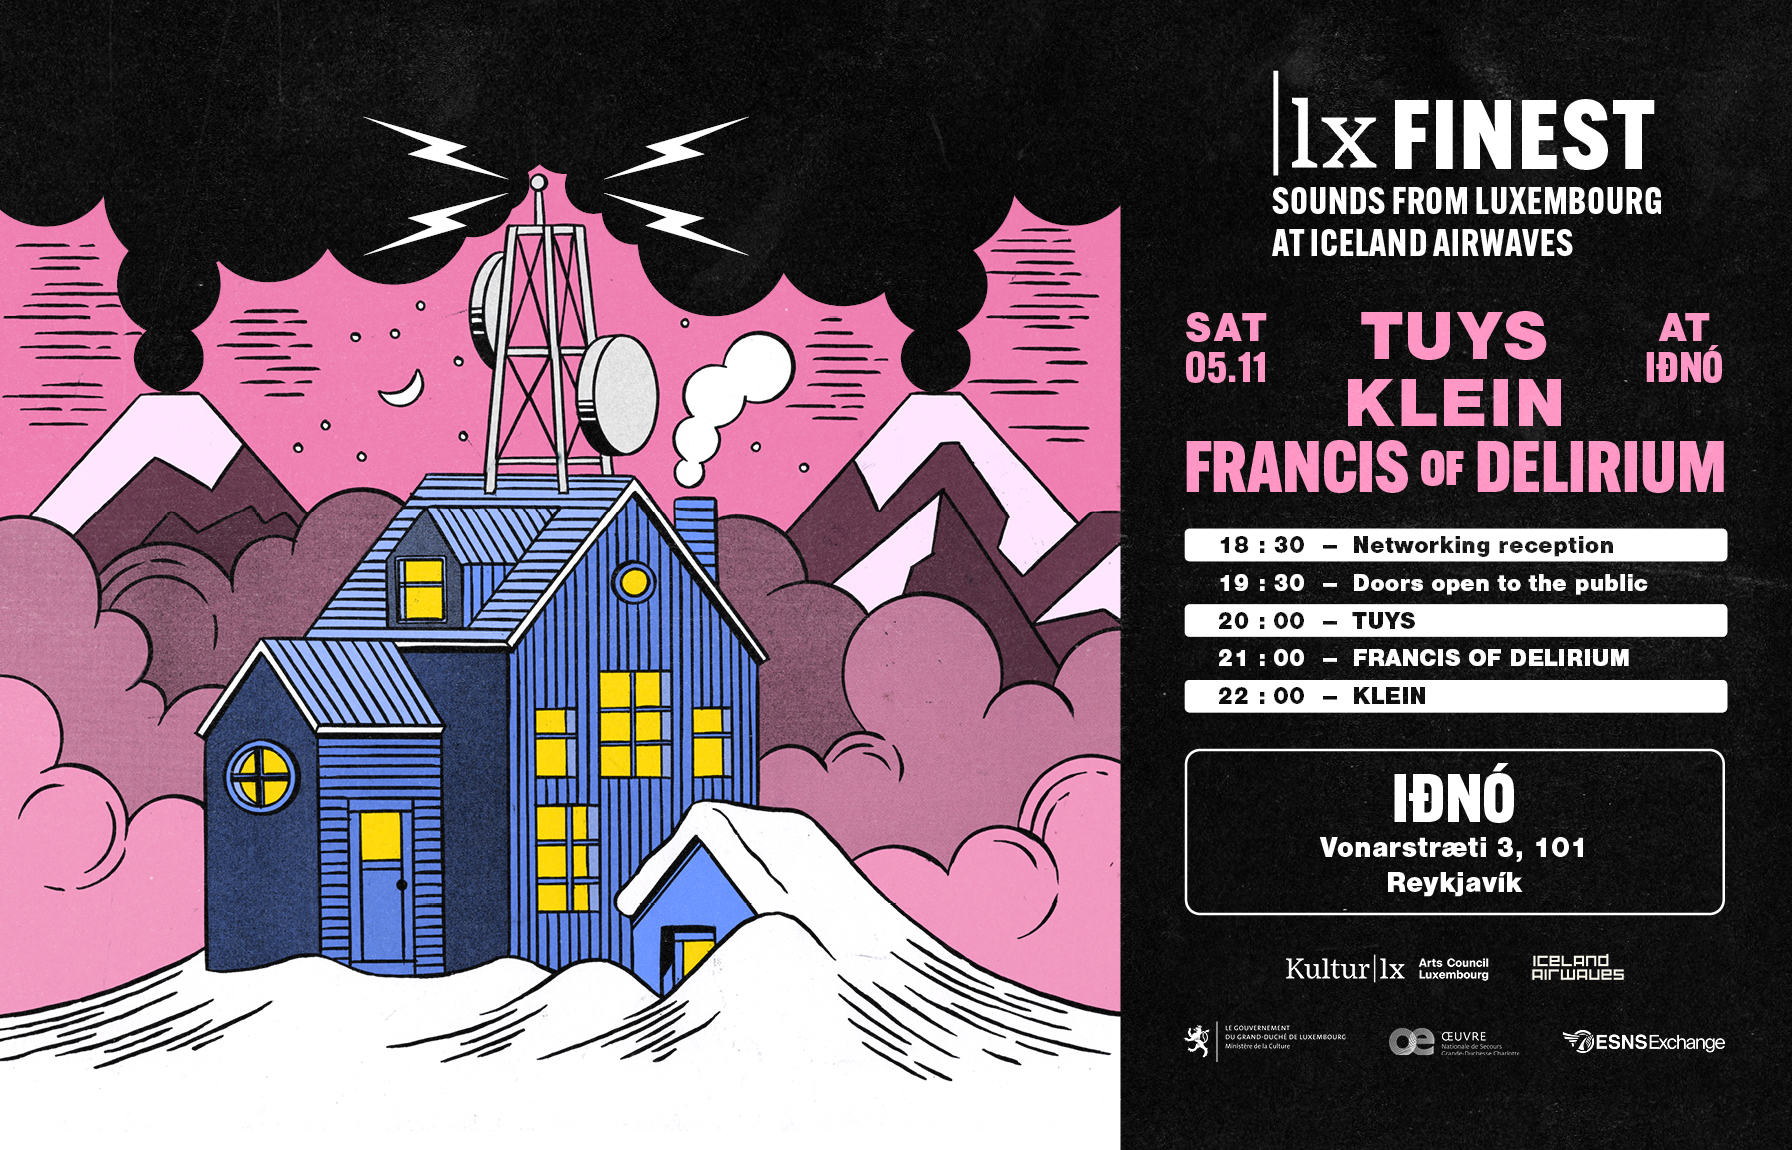 |lx finest - Sounds from Luxembourg at Iceland Airwaves 2022